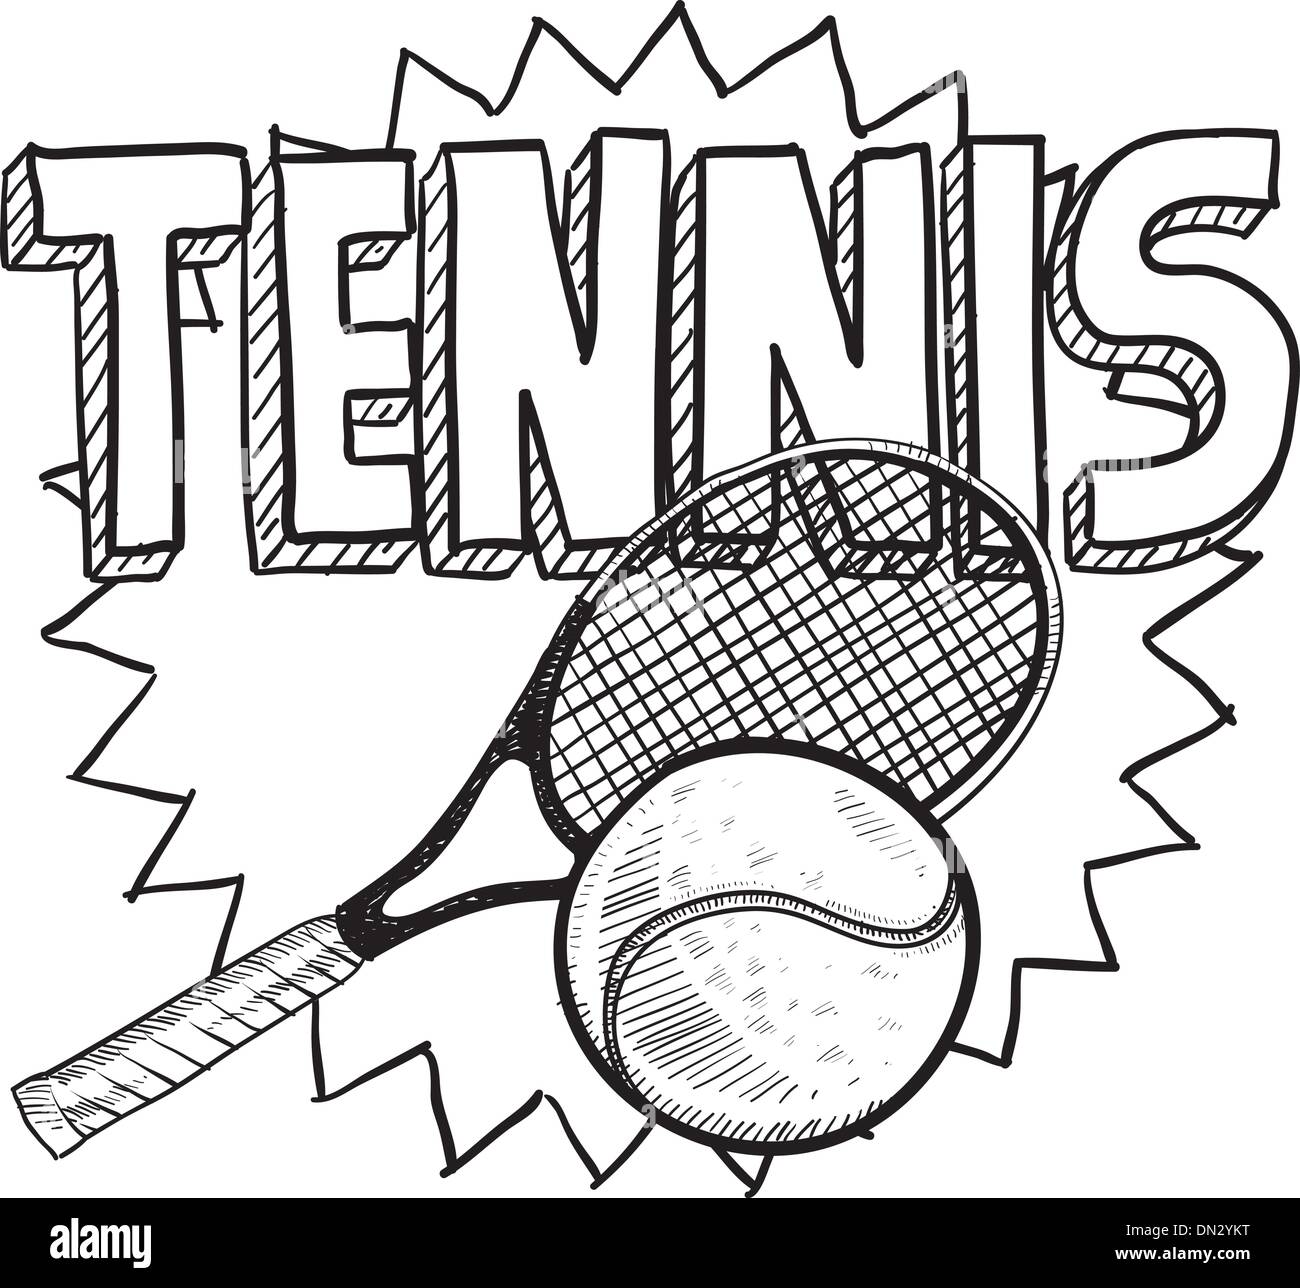 Tennis ball and two tennis rackets Drawing by CSA Images - Pixels